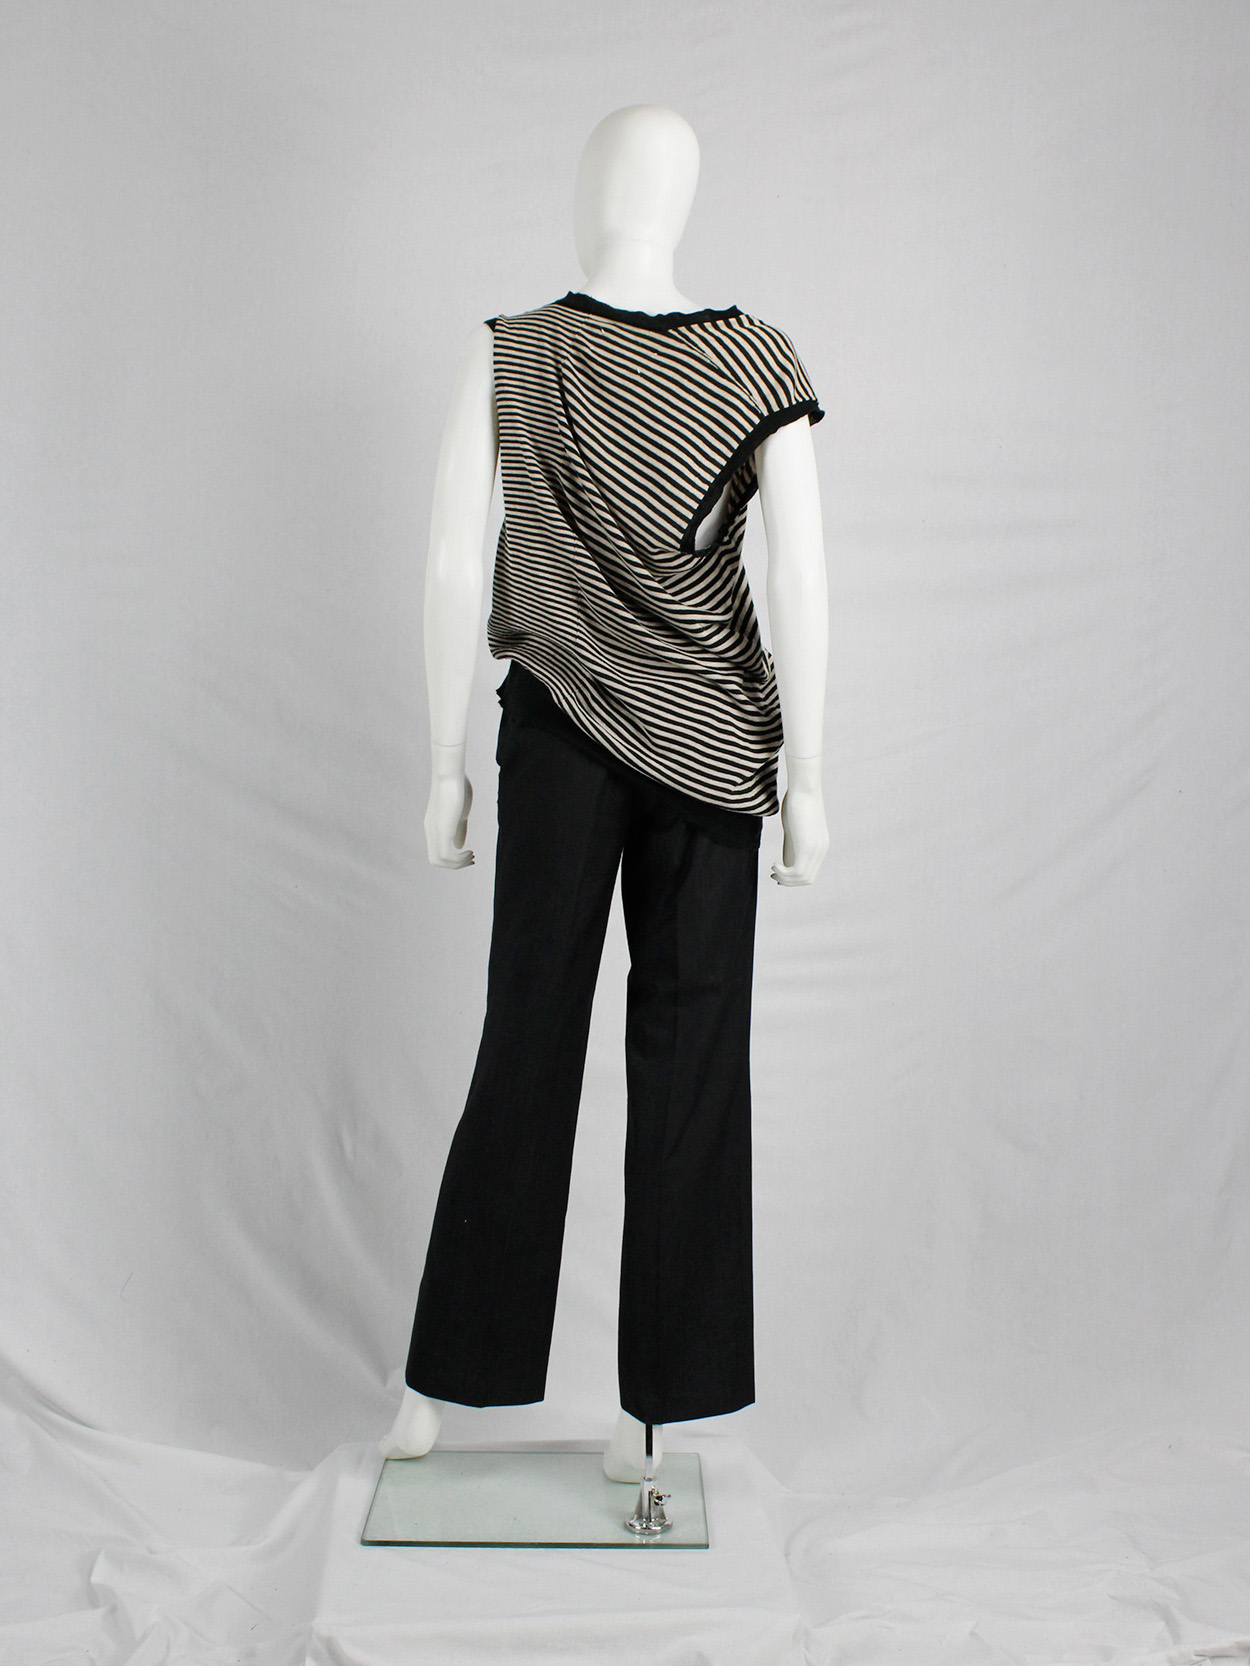 Maison Martin Margiela beige and black striped top, stretched out on ...